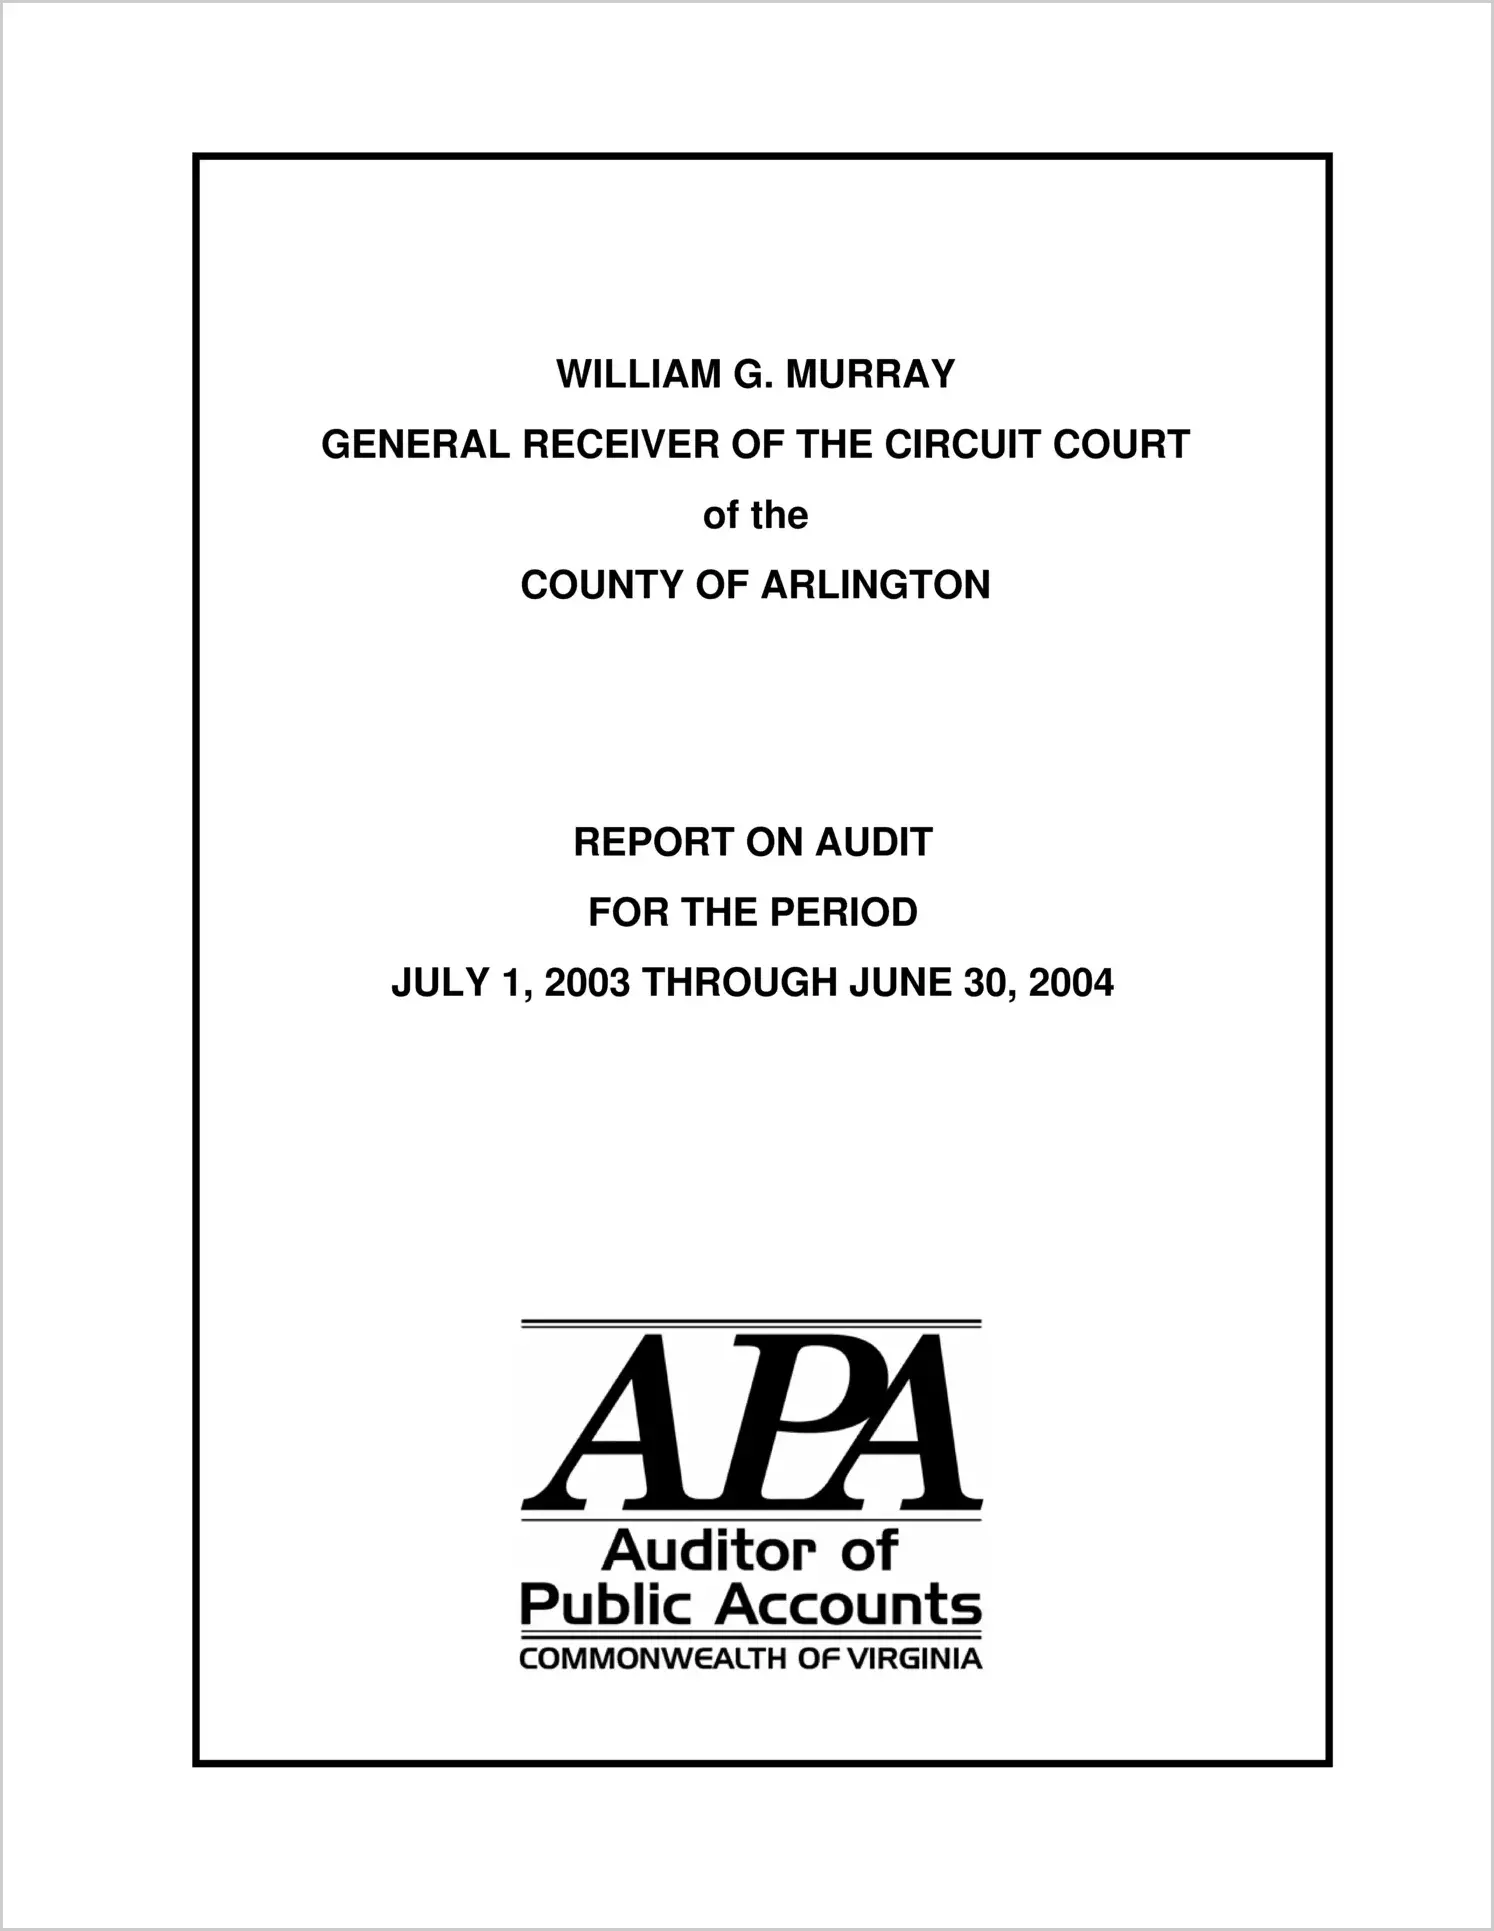 General Receiver of the Circuit Court of the County of Arlington for the period July 1, 2003 through June 30, 2004